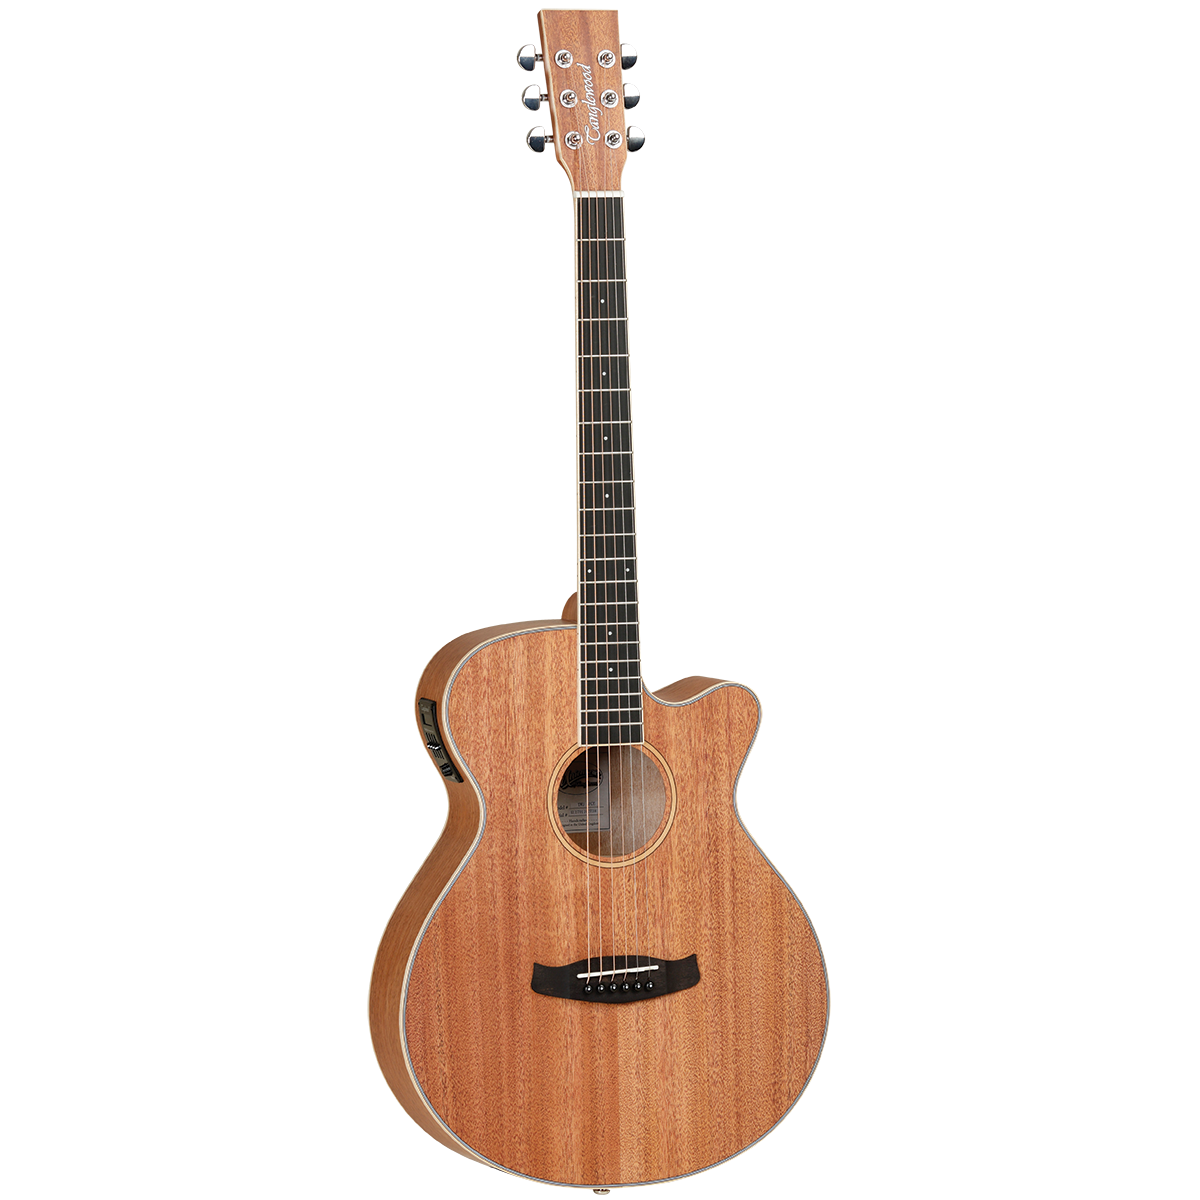 Tanglewood Union Series Superfolk Acoustic Electric Guitar (Mahogany)